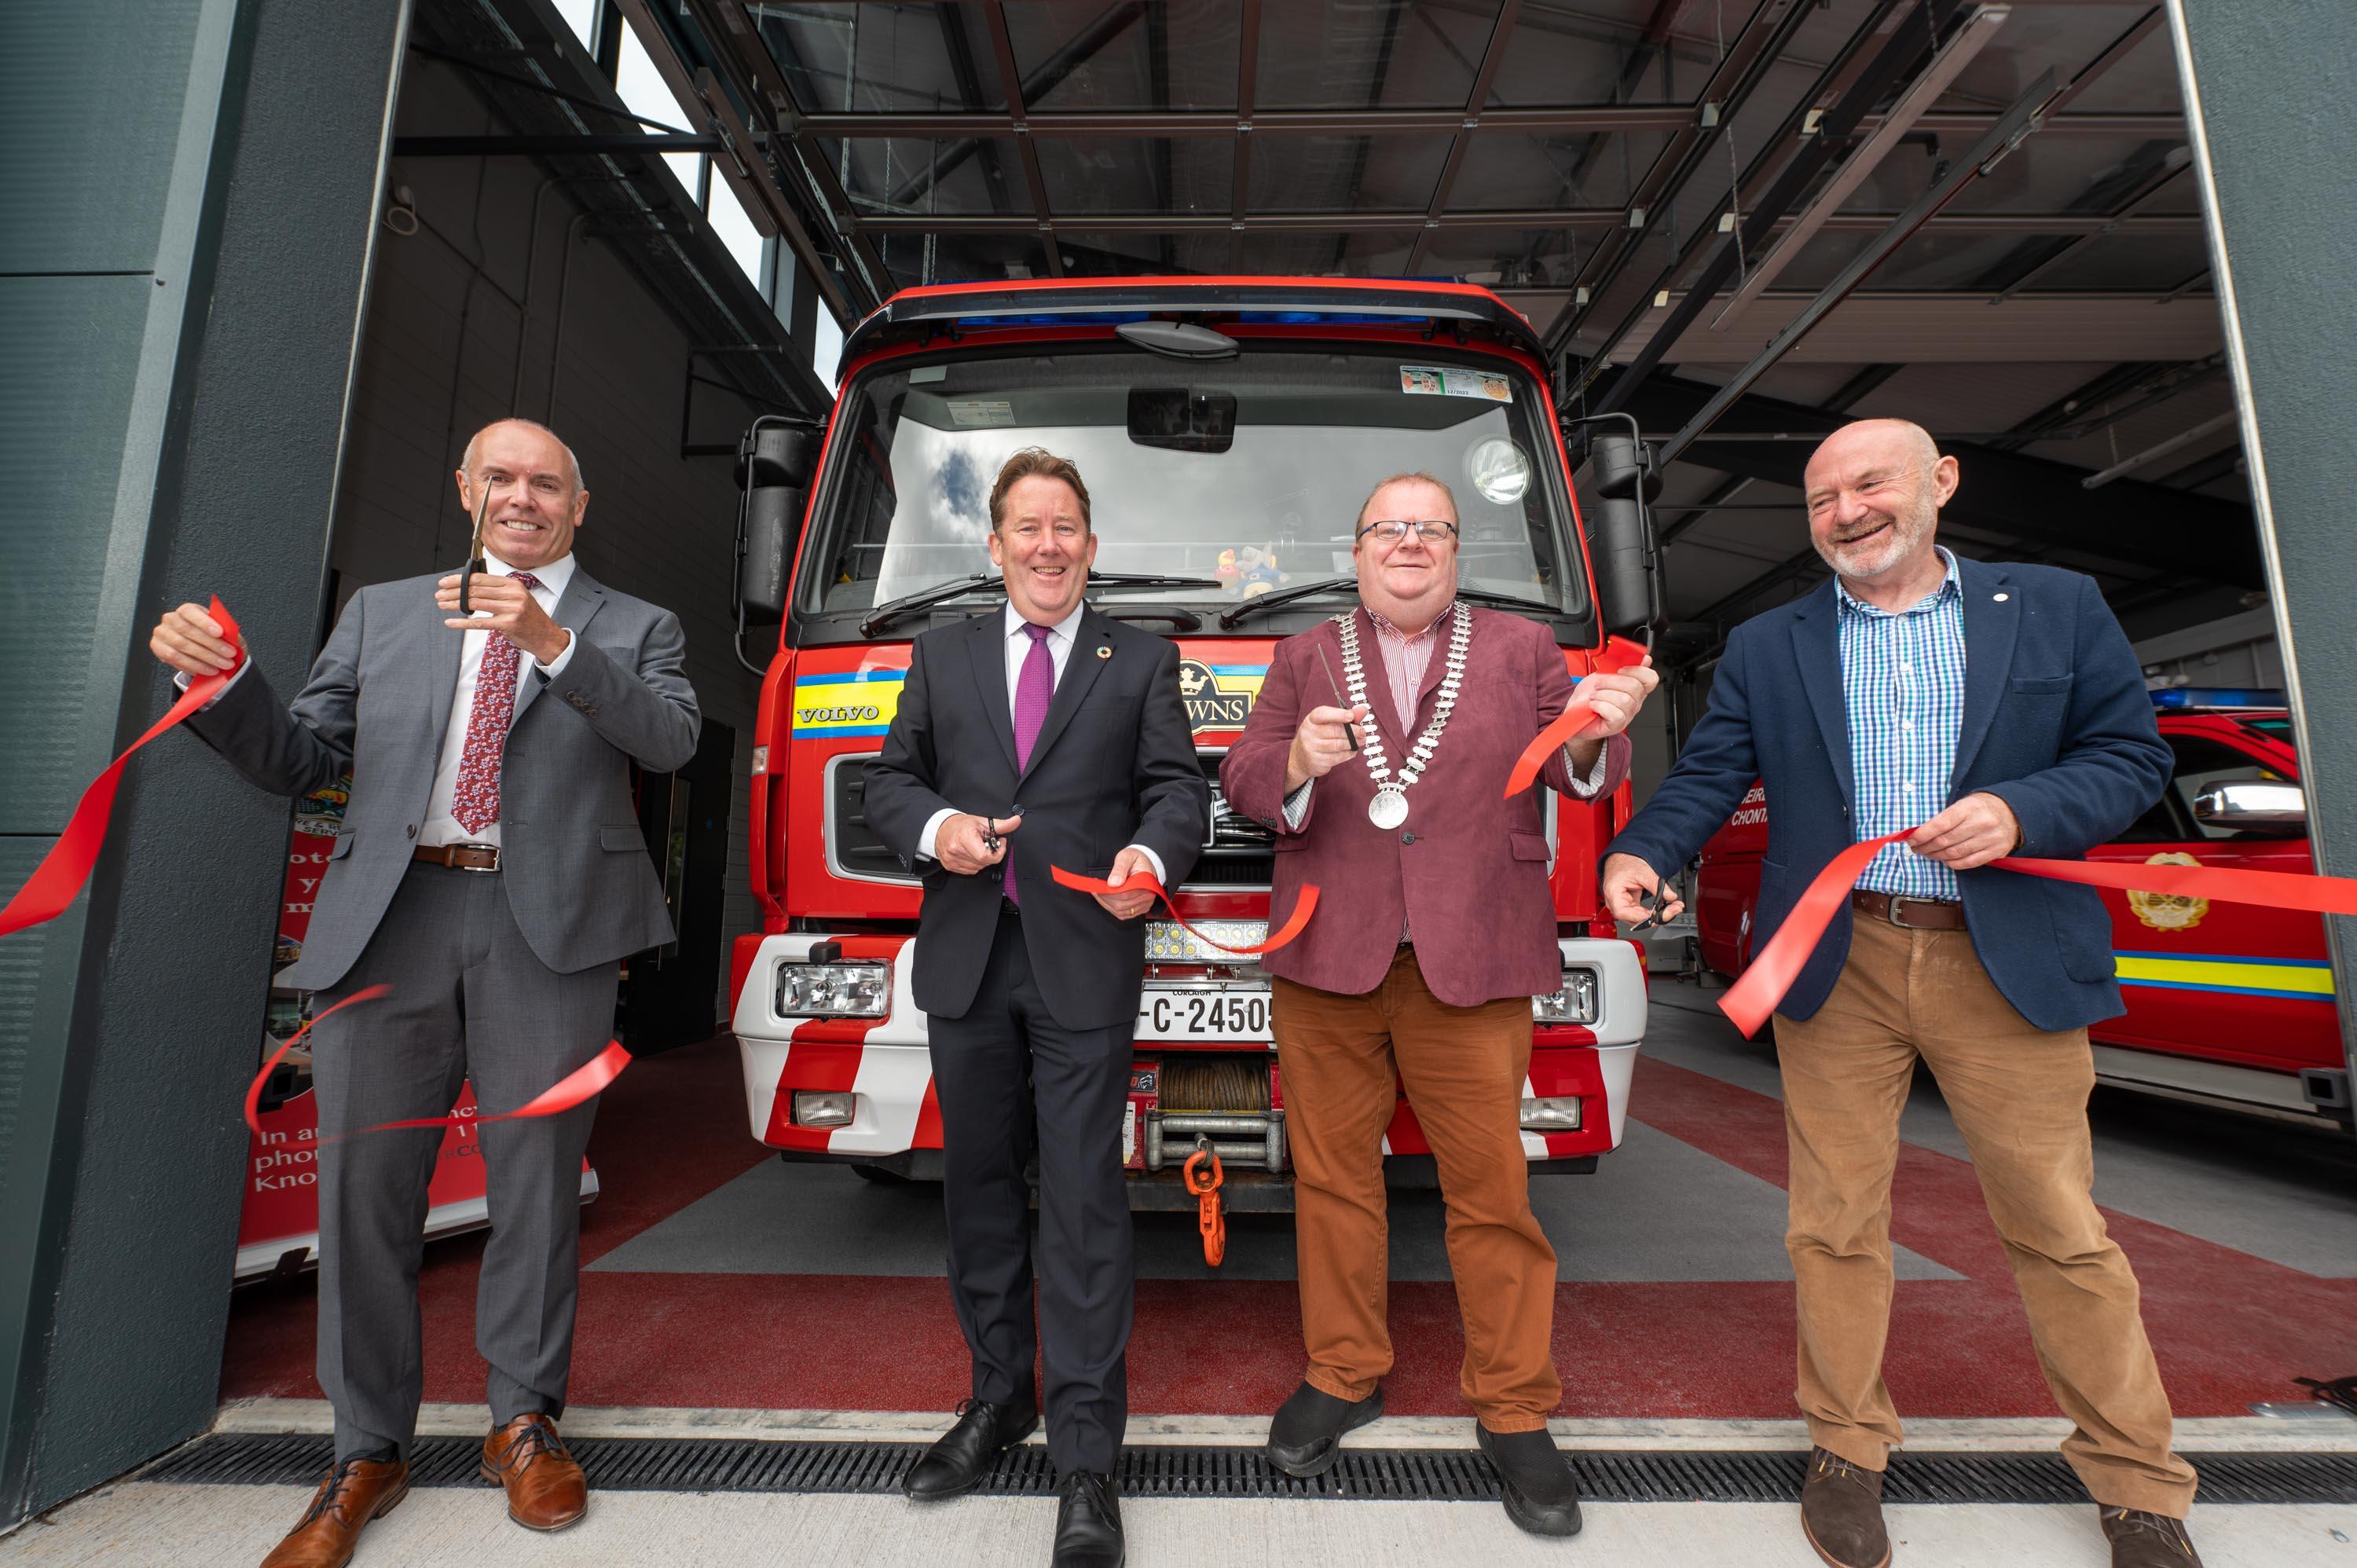 The Mayor of the County of Cork with a group of 3 men cutting a red ribbon infront of a Firetruck